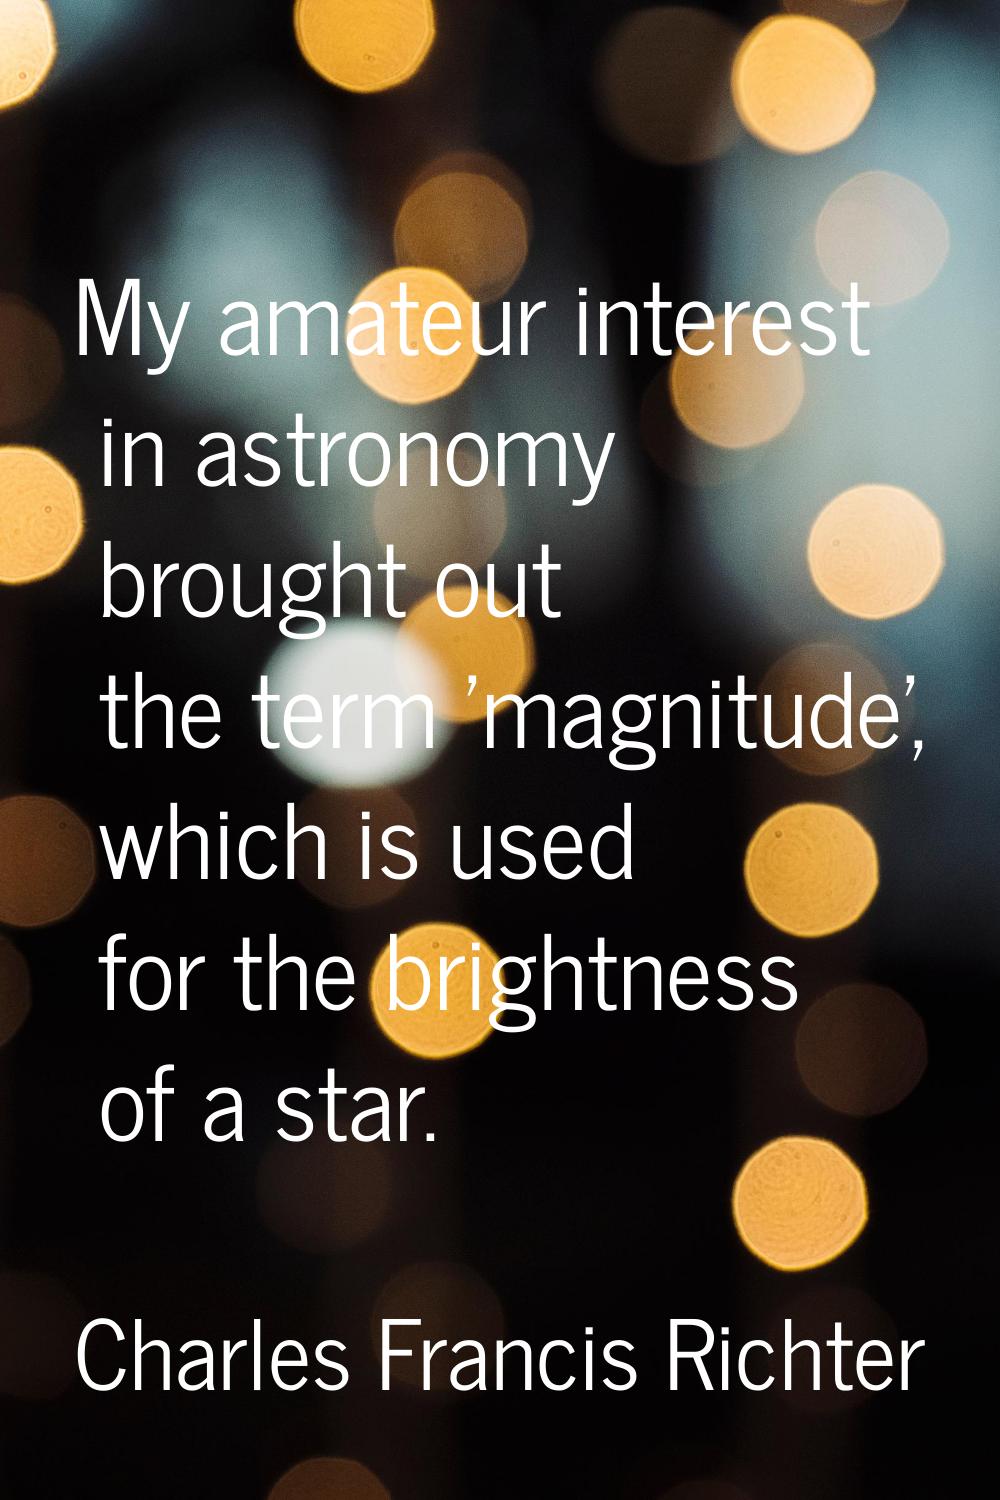 My amateur interest in astronomy brought out the term 'magnitude', which is used for the brightness